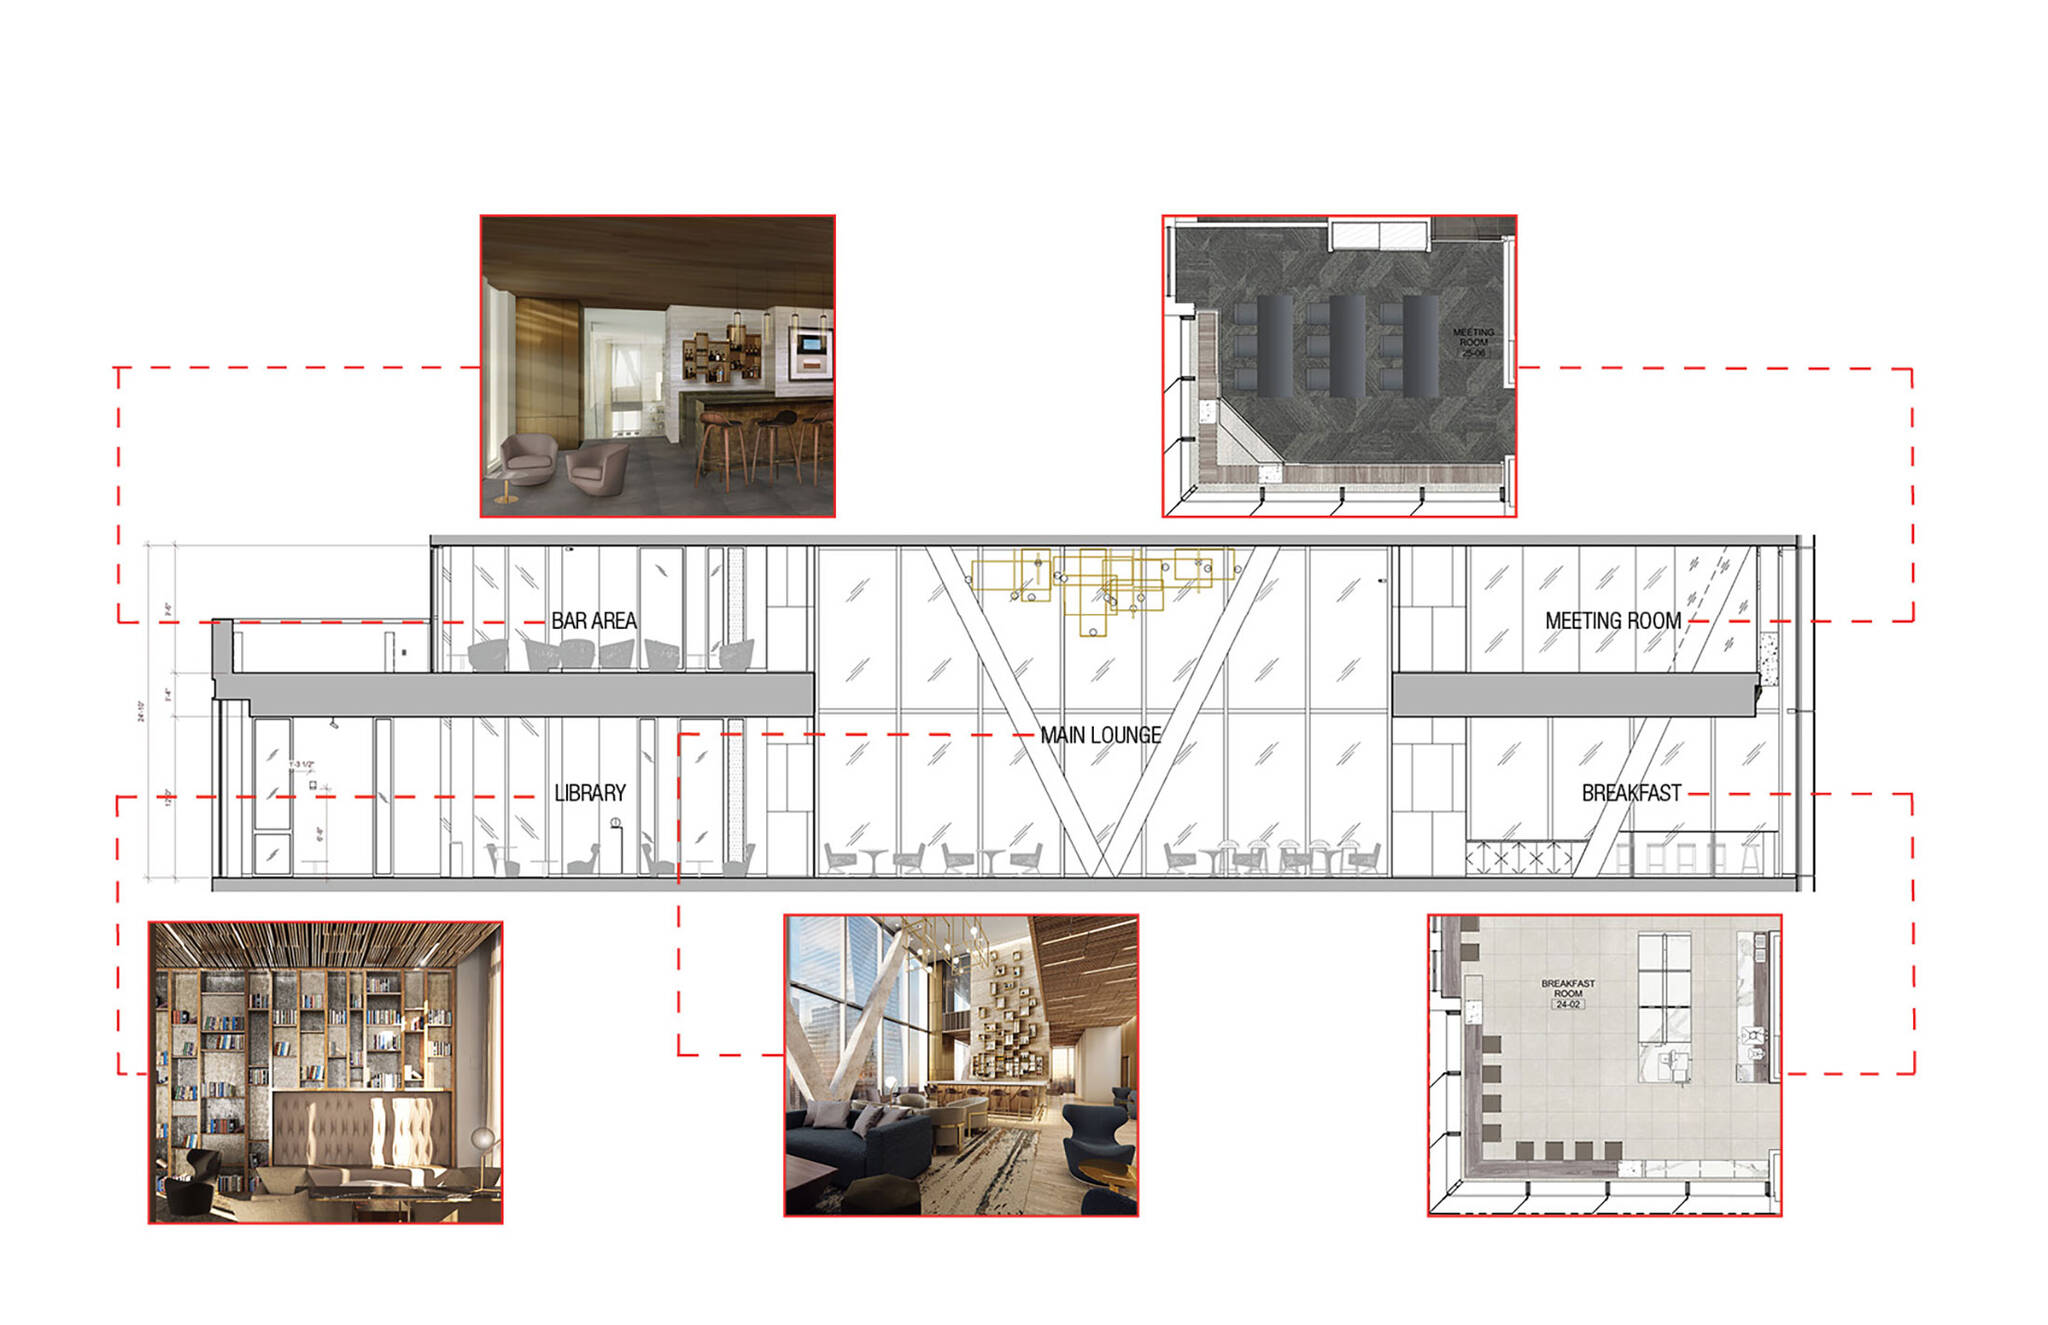 Amenities section diagram of the Hudson Yards Autograph Hotel project by Marriott, a modular hotel tower located at 432 West 31st Street in Hudson Yards, New York City designed by the architecture studio Danny Forster & Architecture